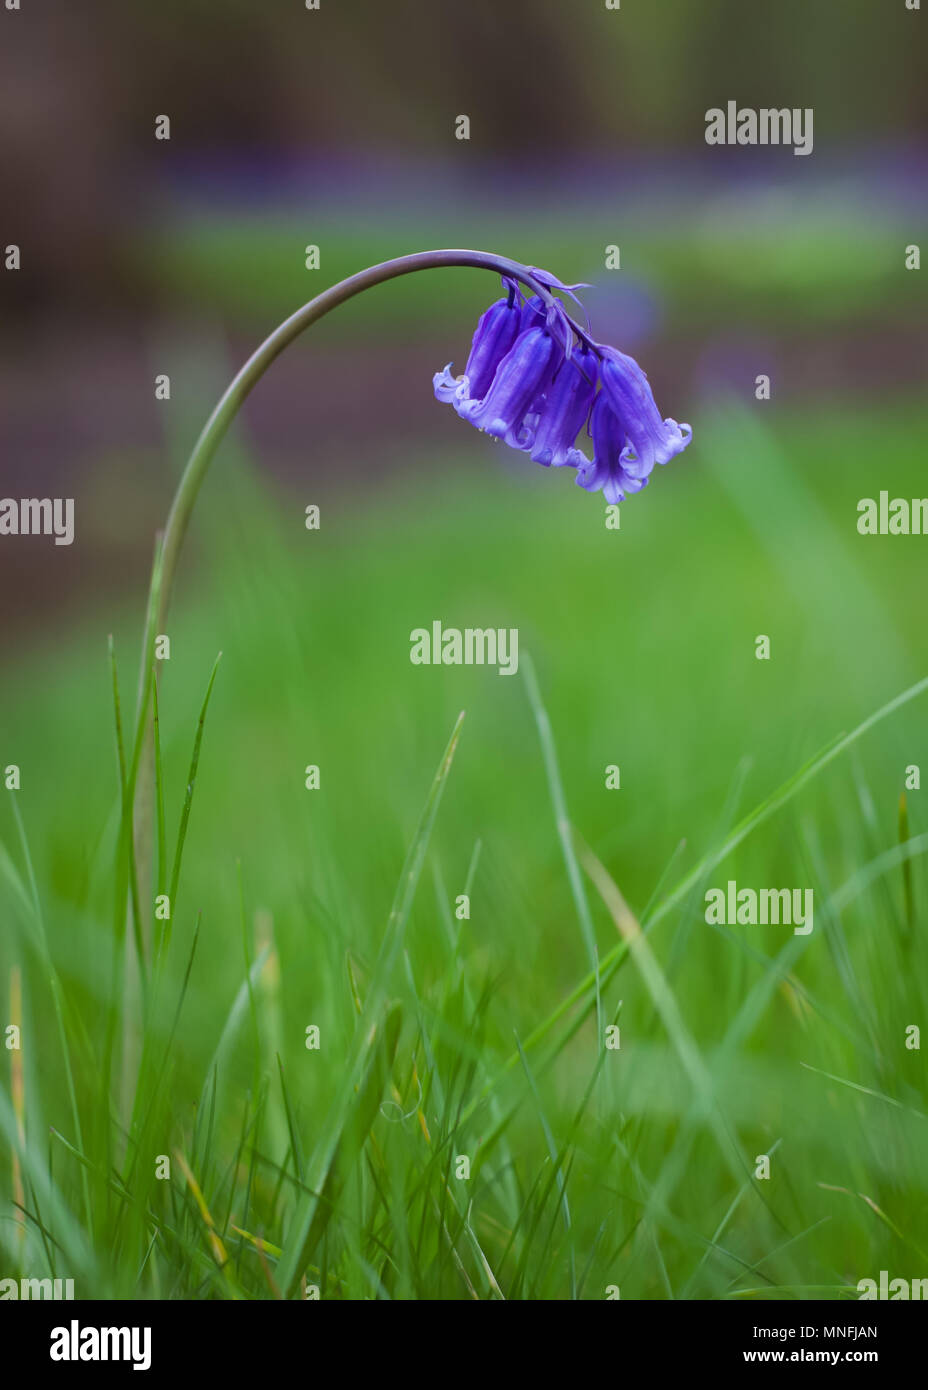 Very charming flowers in the ground Stock Photo